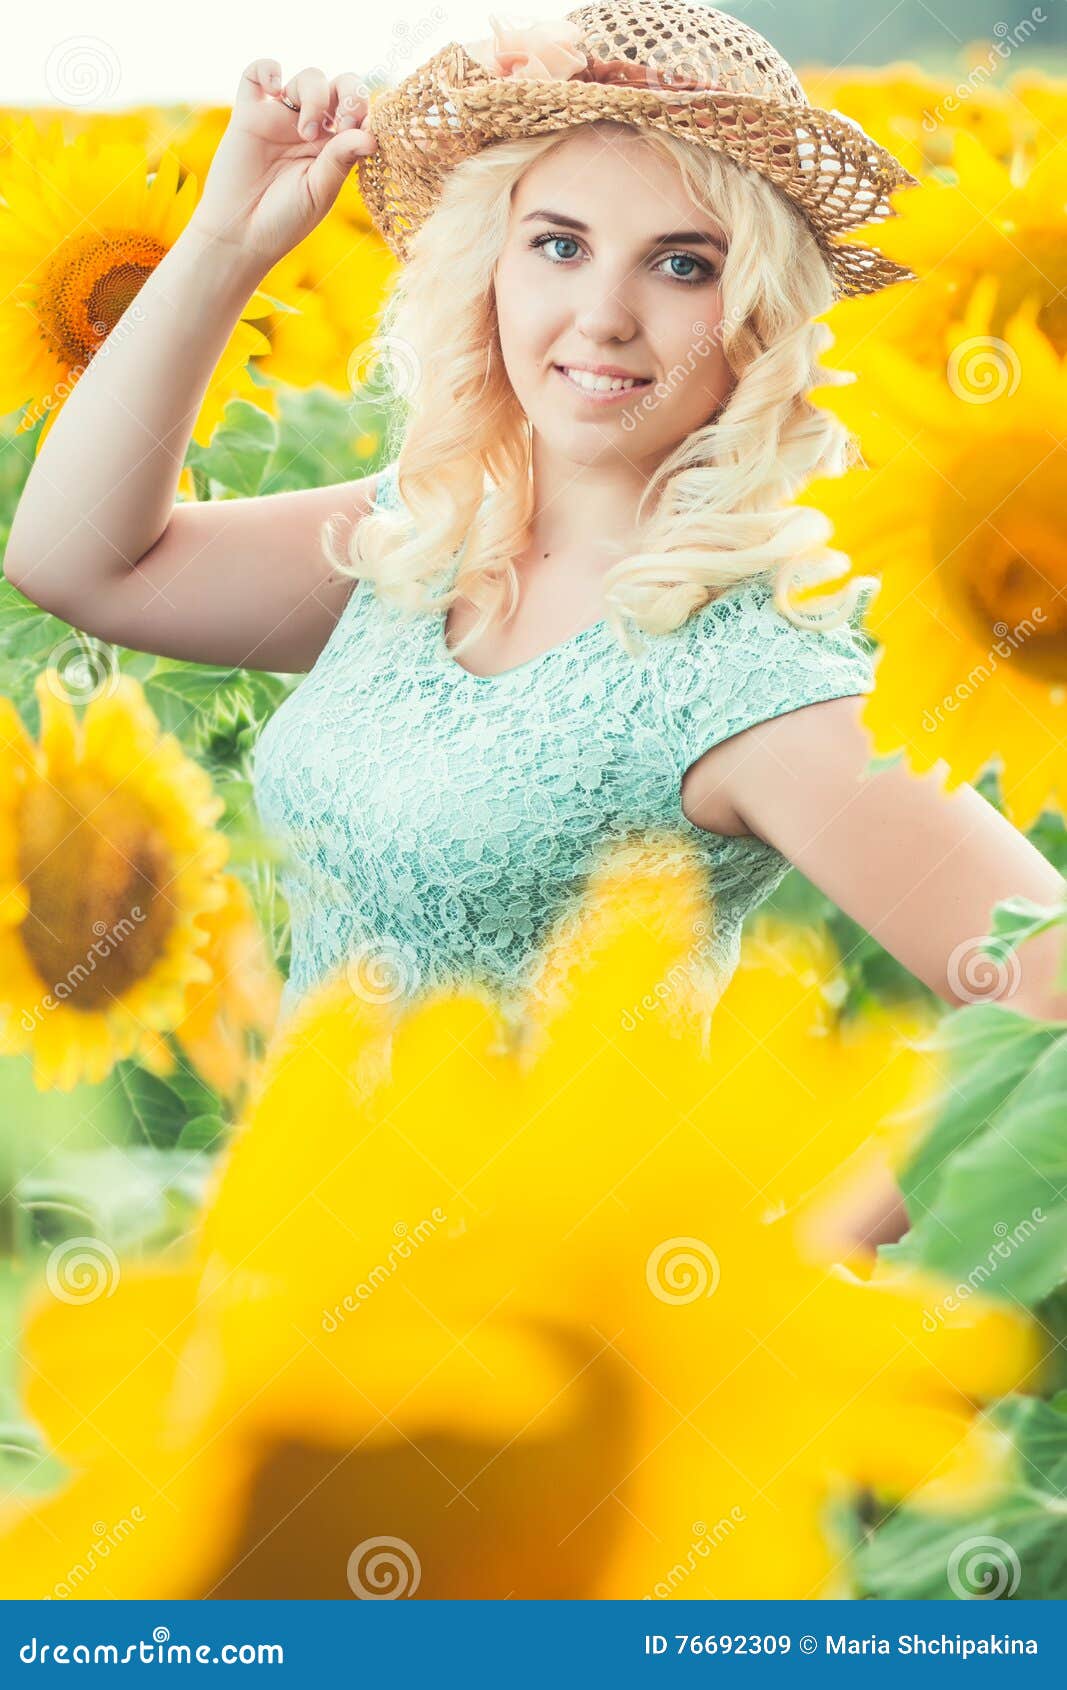 Portrait of a beautiful smiling blonde girl in a straw hat outdoors in a field of sunflowers